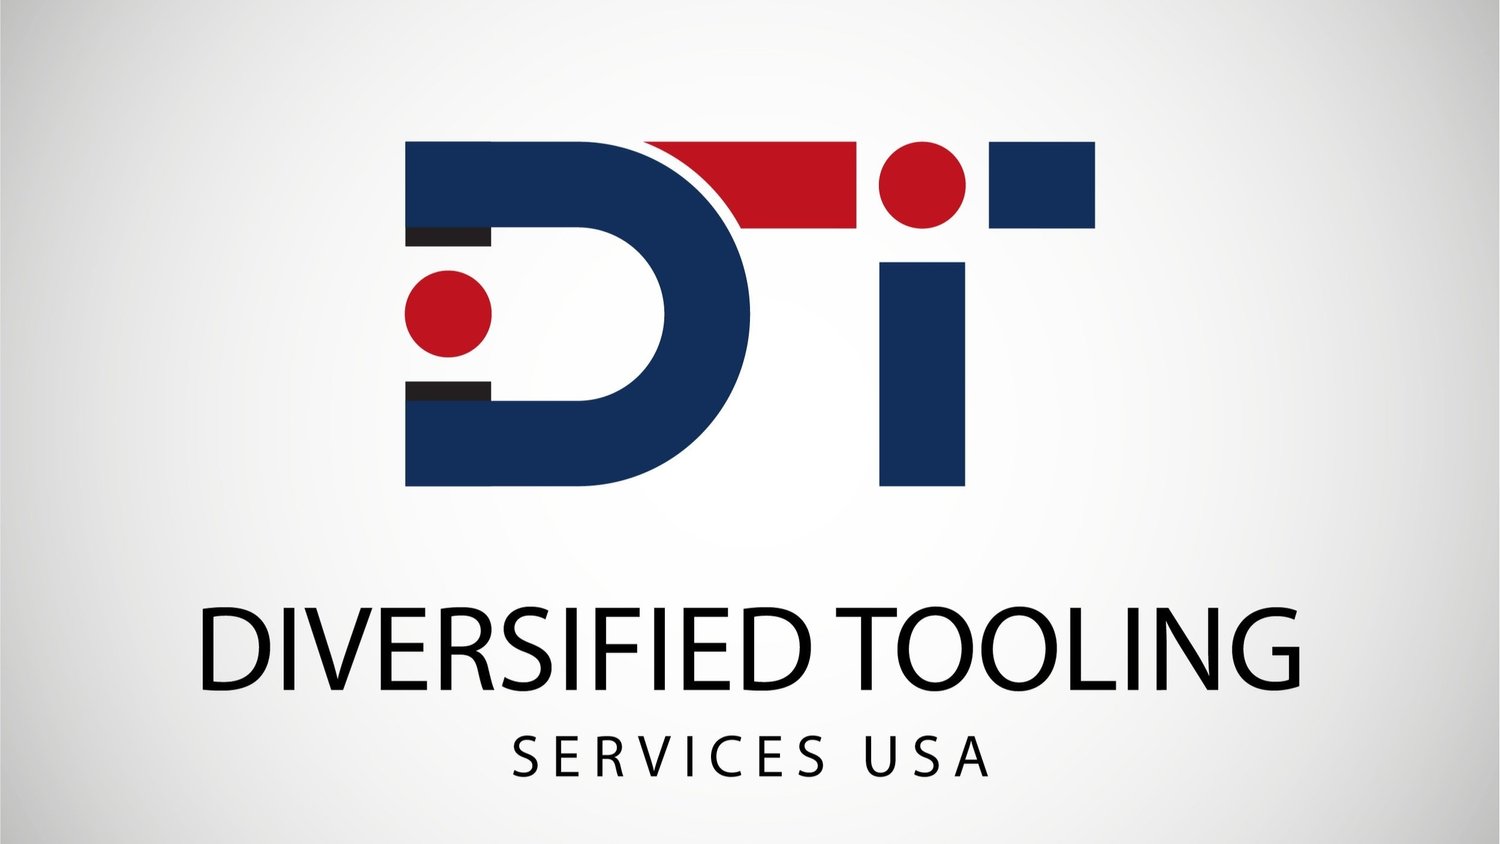 Diversified Tooling Services U.S.A.